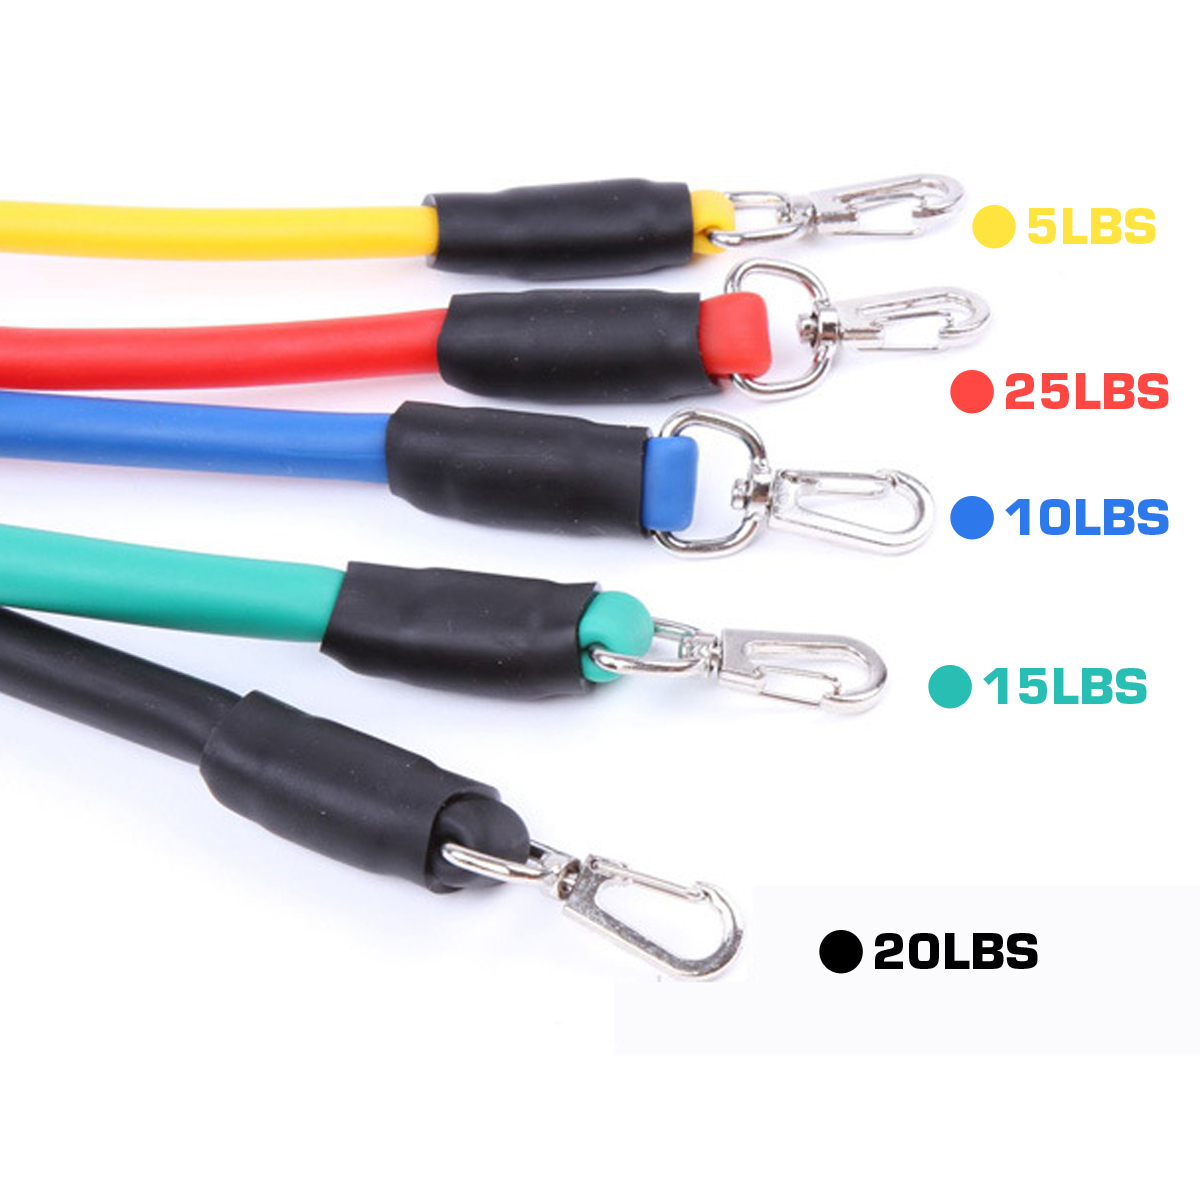 11pcs-Resistance-Bands-Elastic-Rope-Weight-Losing-Fitness-Exercise-Tools-1680169-5